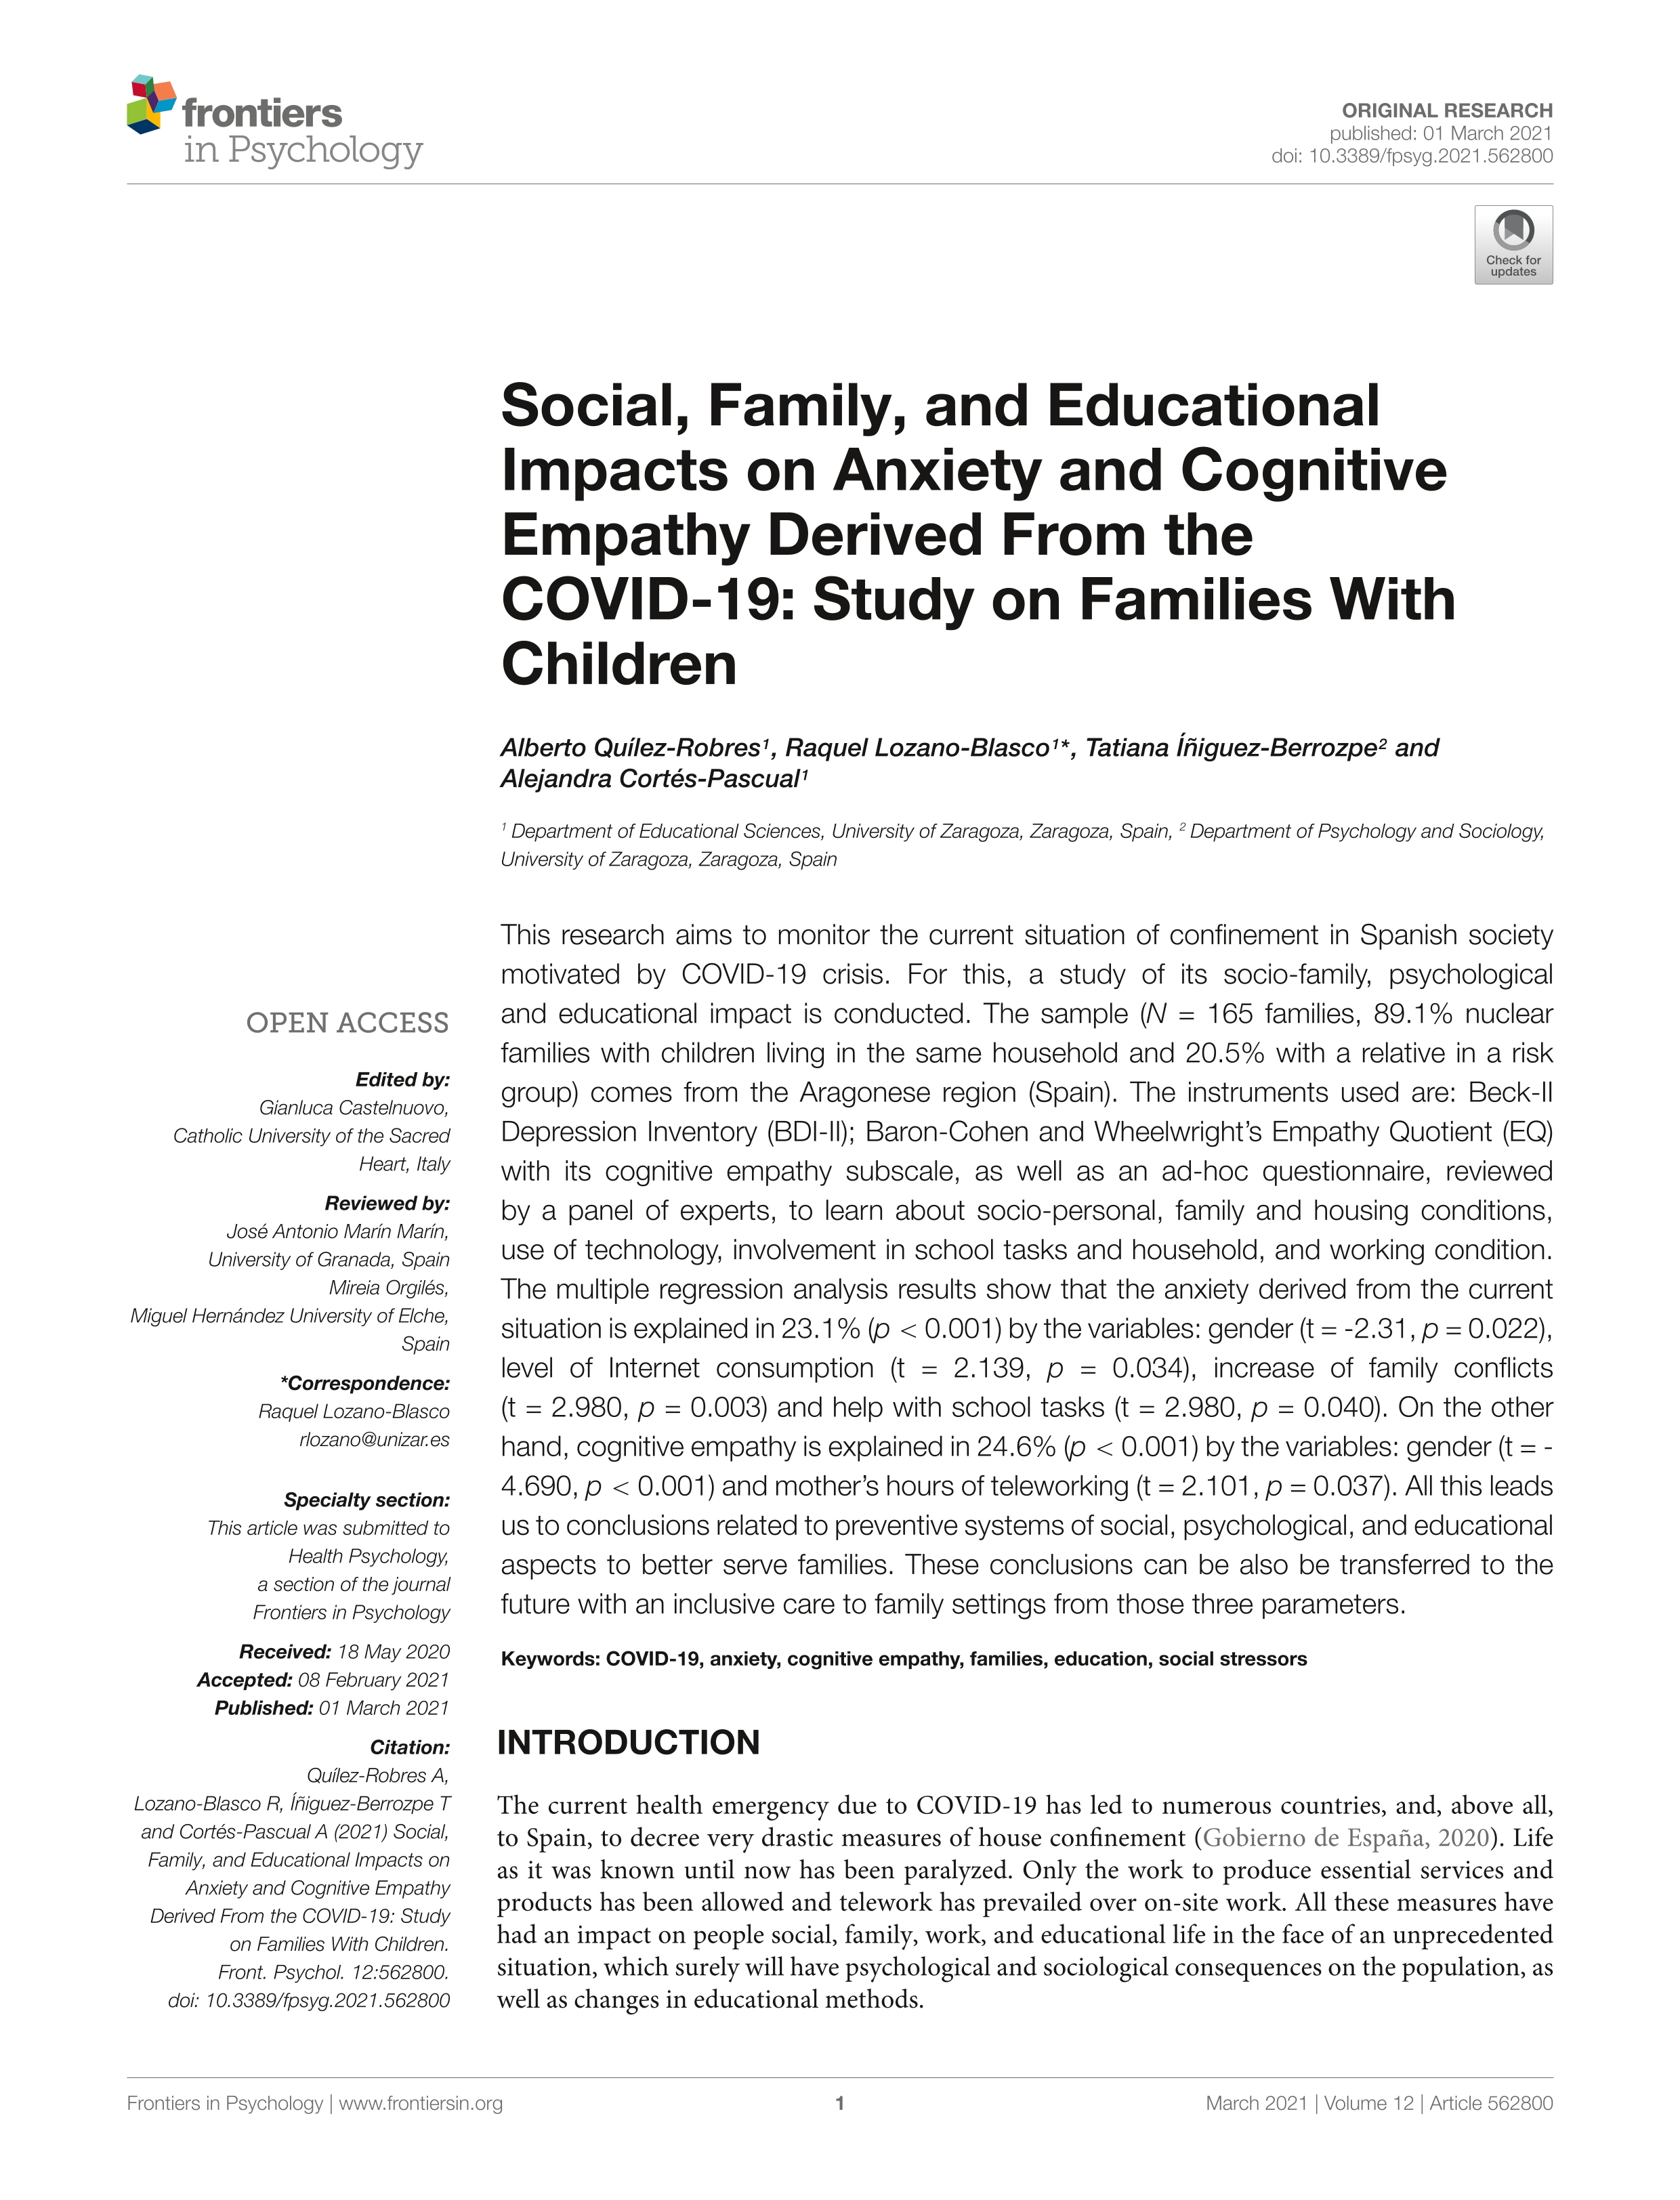 Social, Family, and Educational Impacts on Anxiety and Cognitive Empathy Derived From the COVID-19: Study on Families With Children